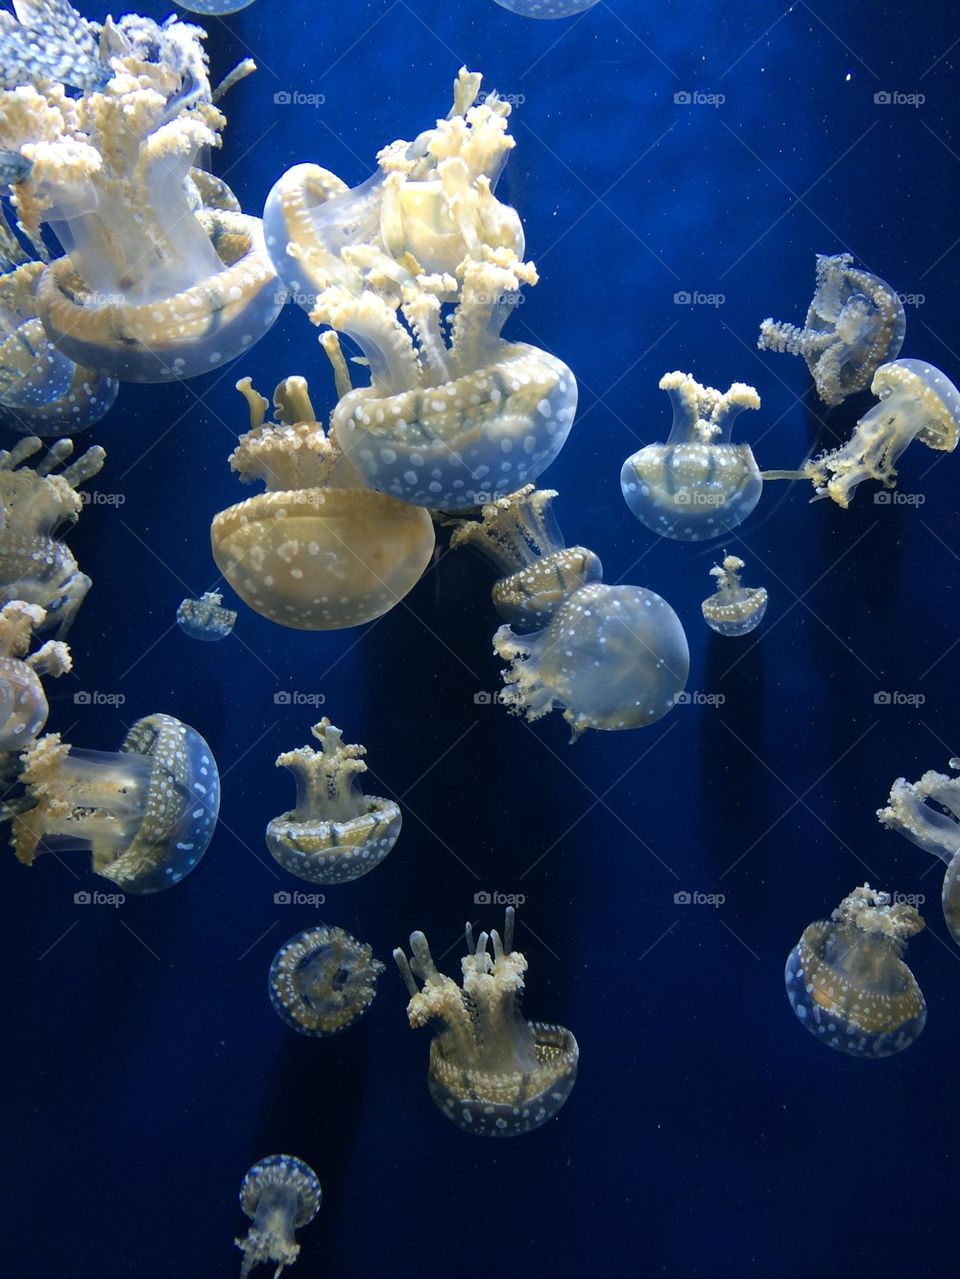 Jellyfishes in water